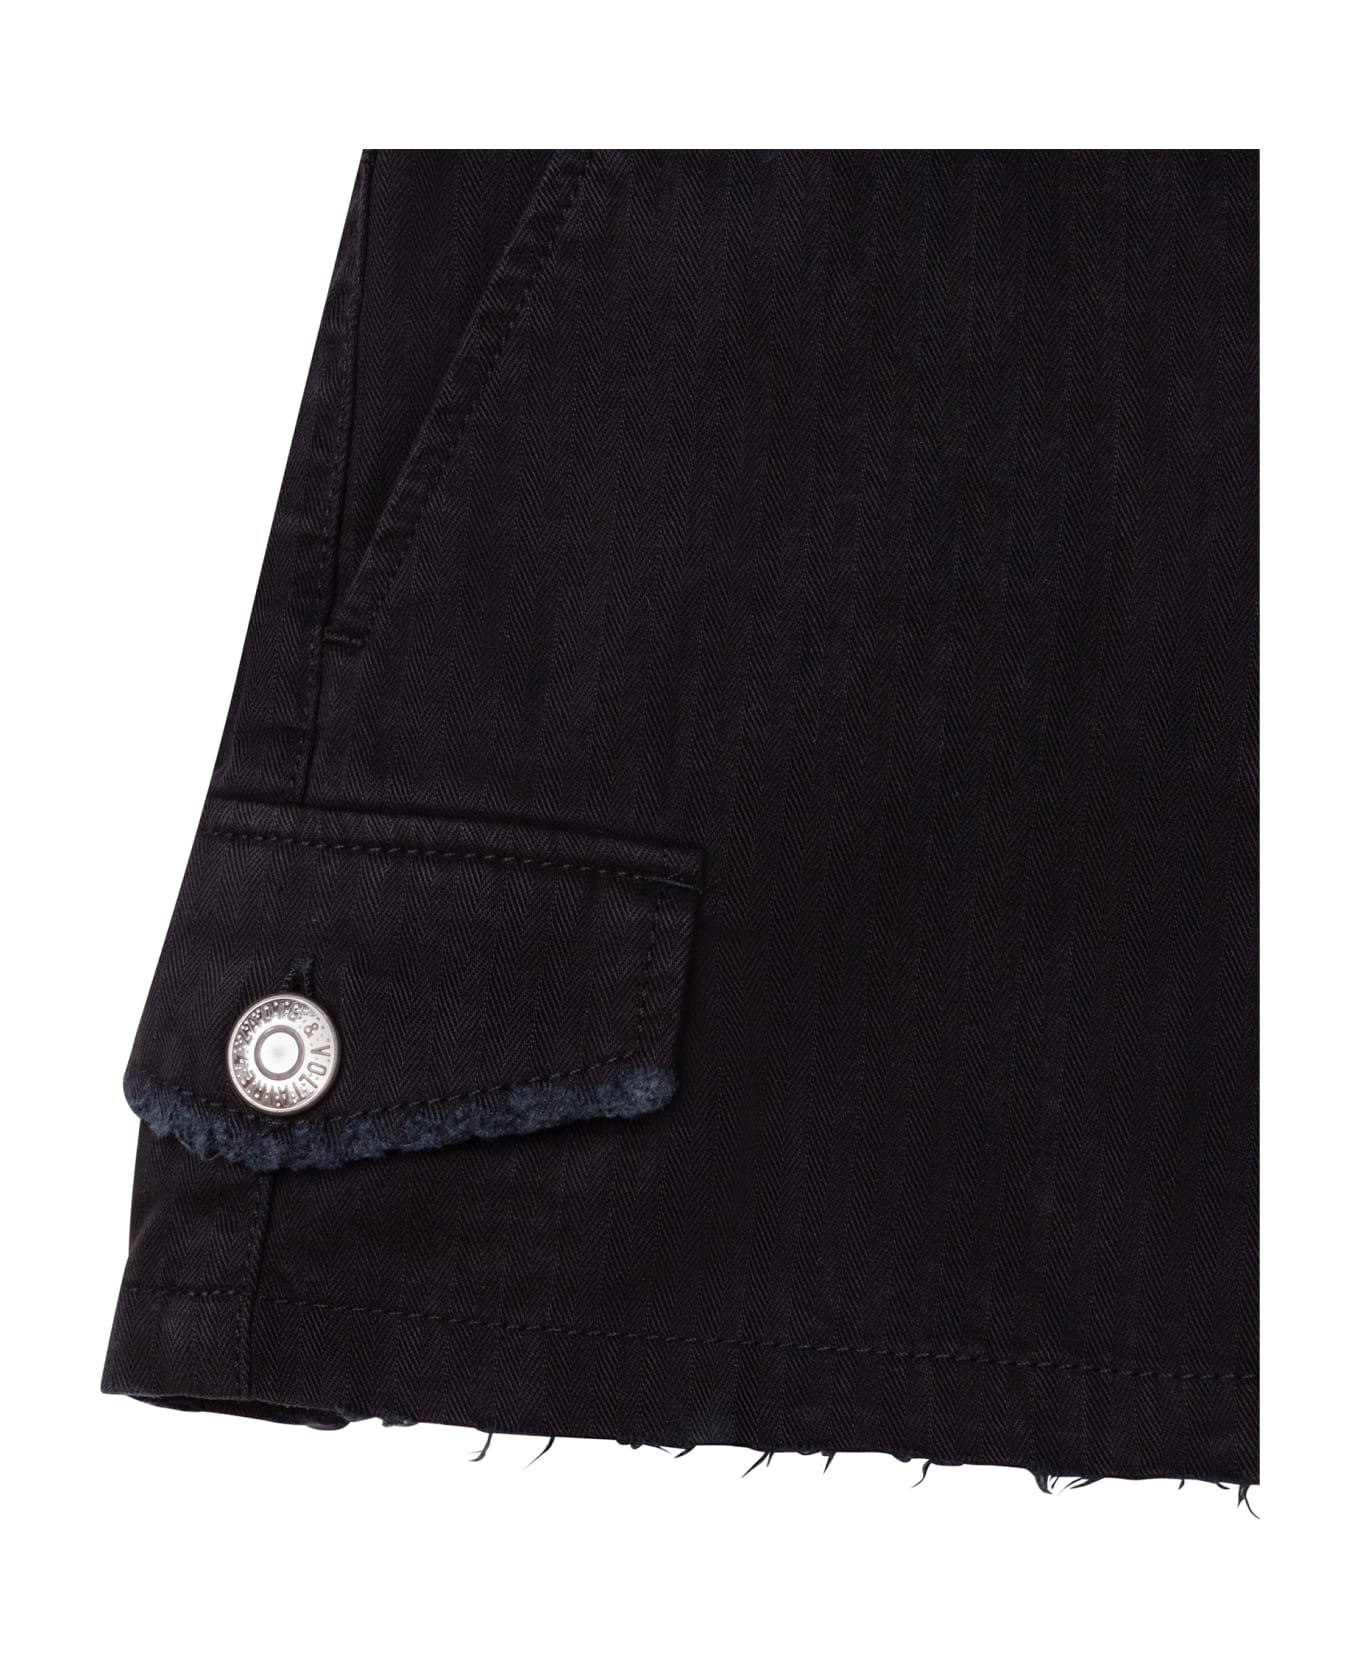 Zadig & Voltaire Shorts With Pockets - Black ボトムス